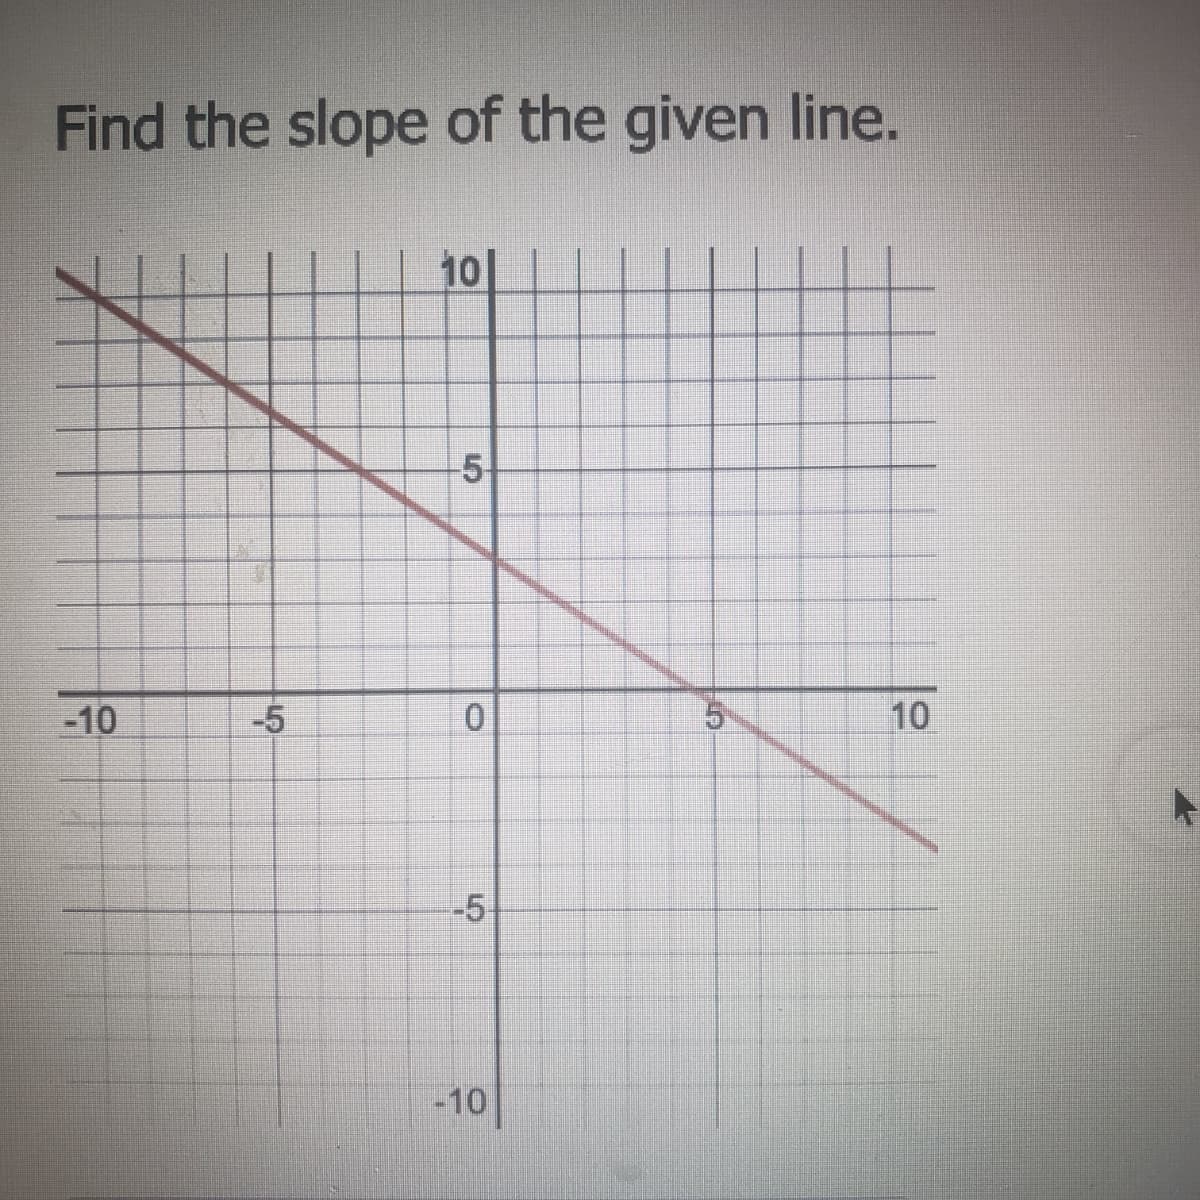 Find the slope of the given line.
10
5-
-10
-5
10
-5
-10|
